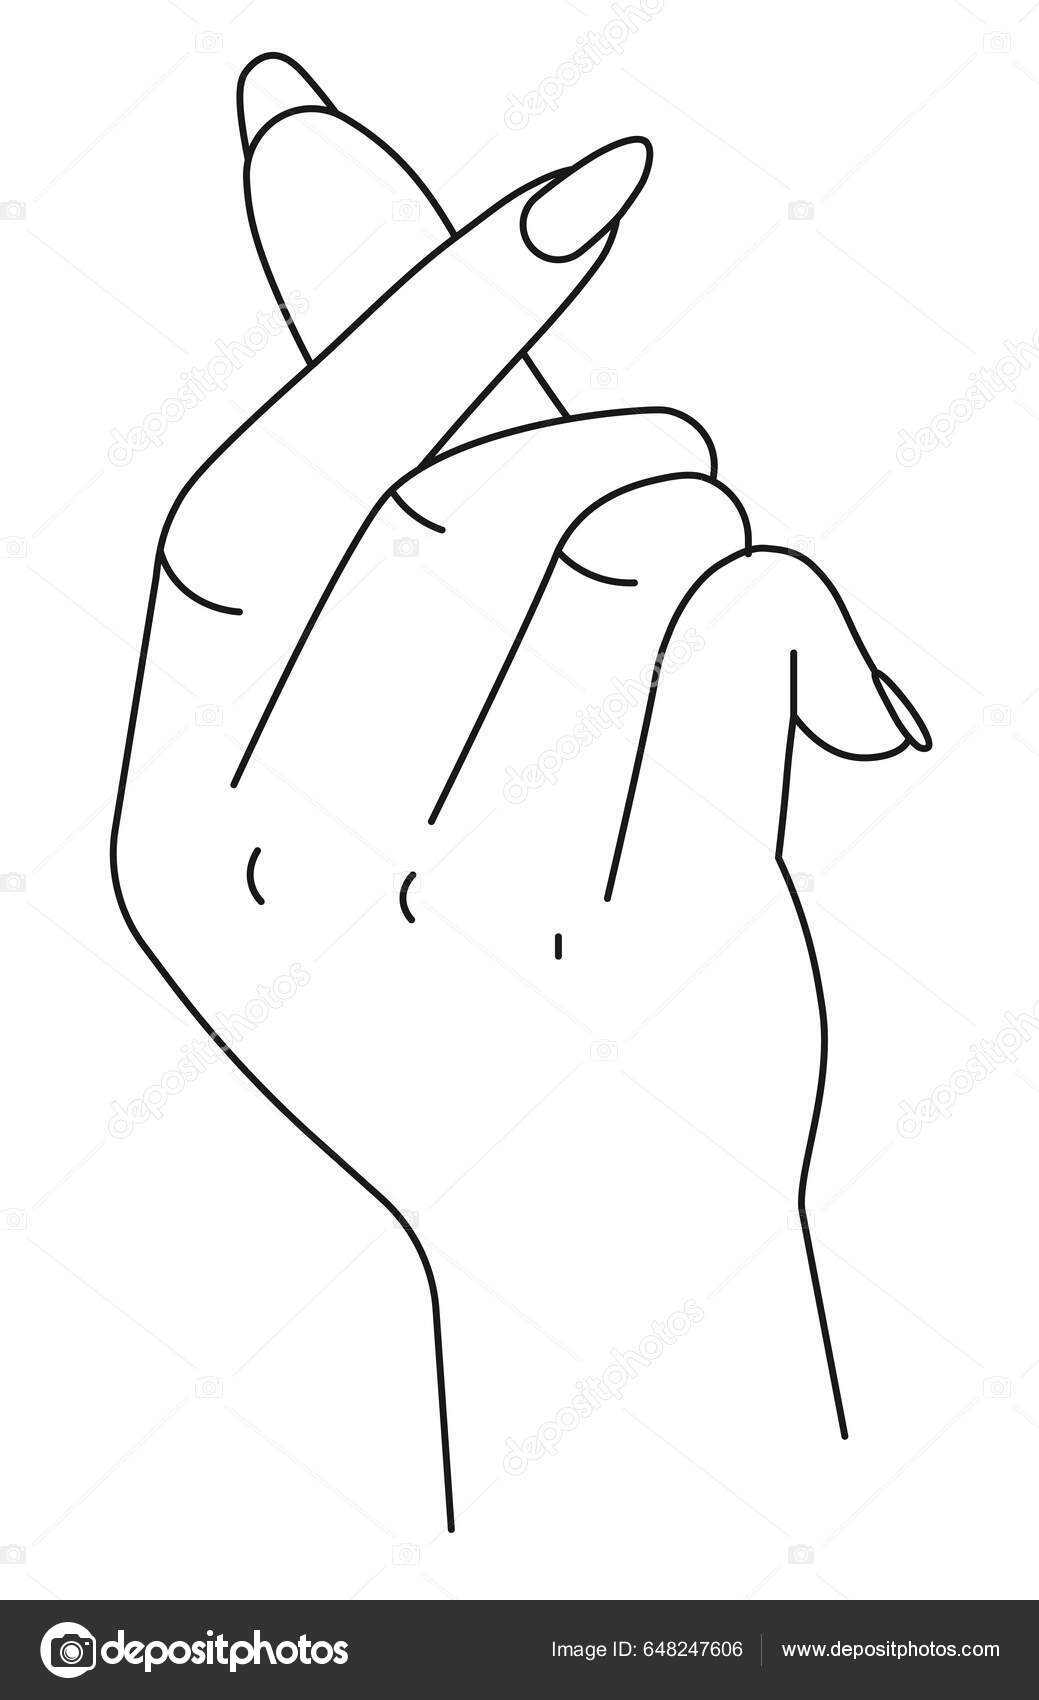 depositphotos 648247606 stock illustration hand showing sign clasping isolated